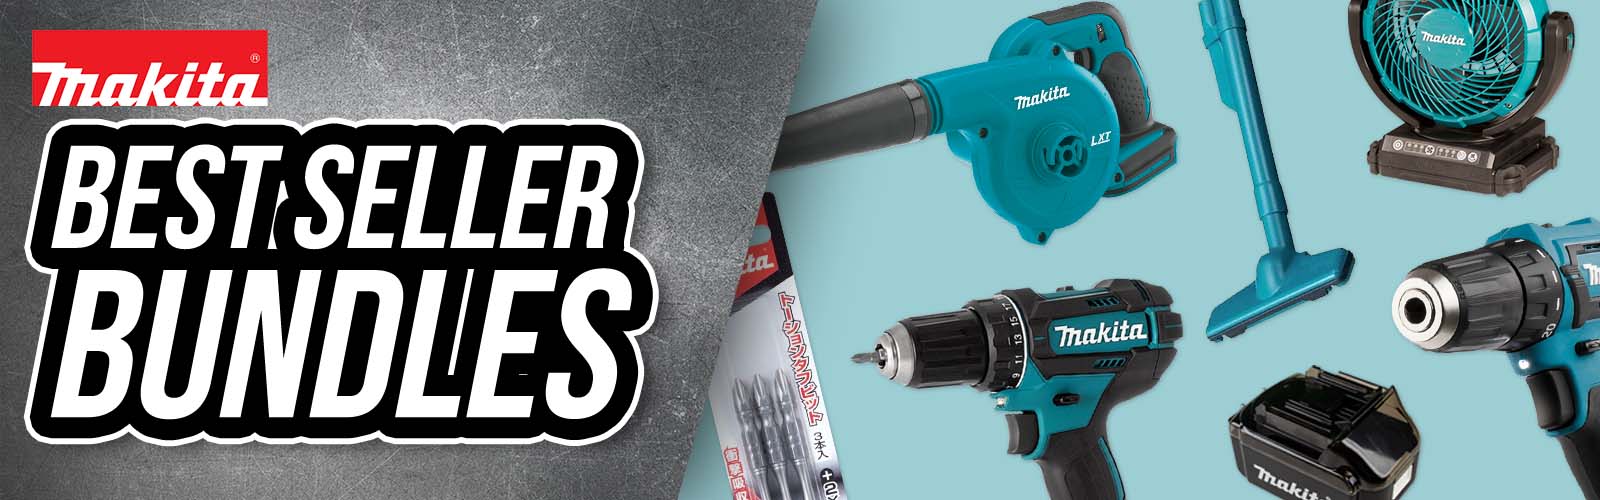 Makita National day Promotion